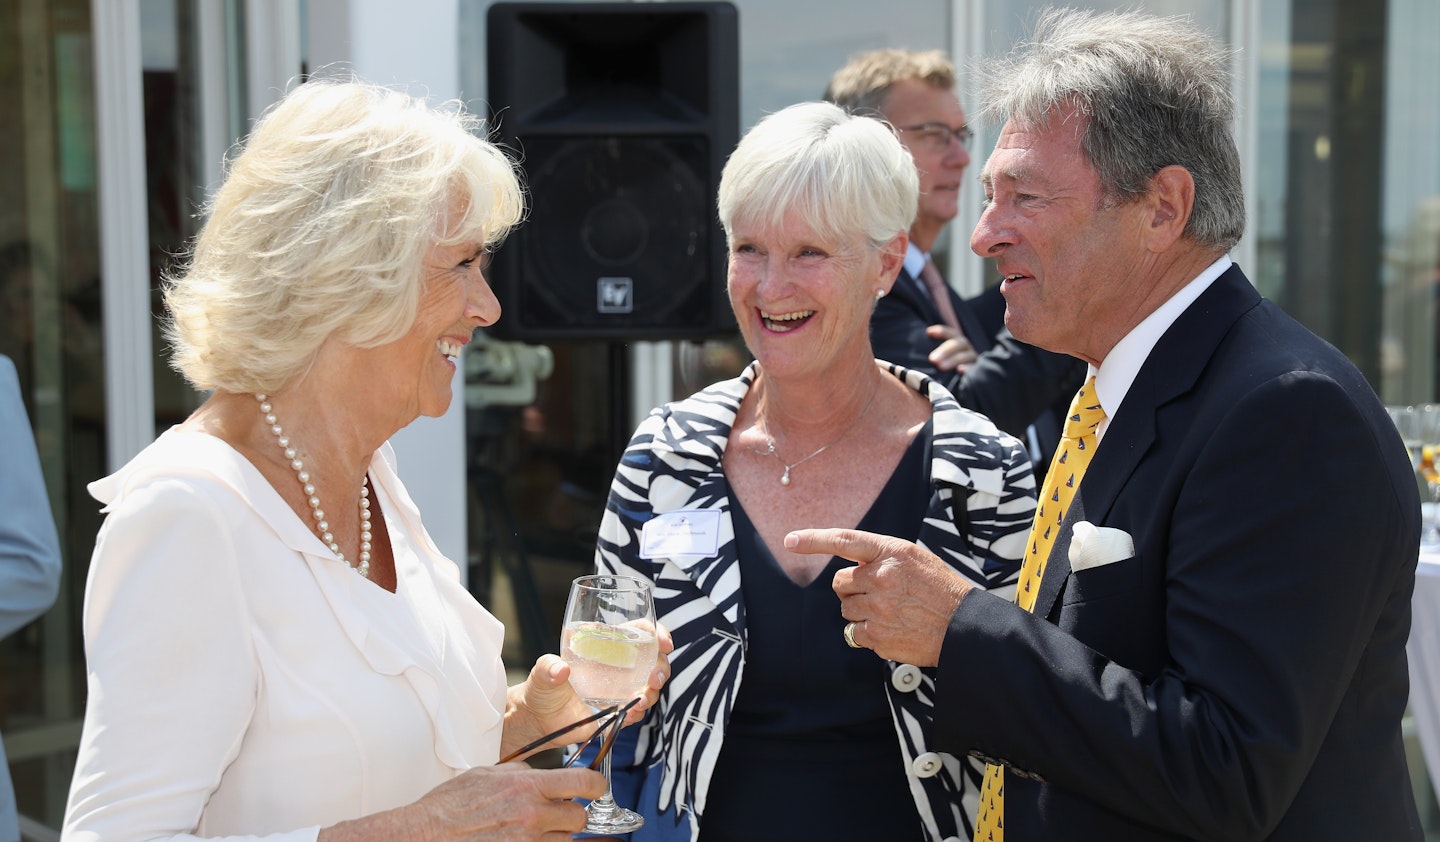 Alan-Titchmarsh-with-Wife-and-Camilla-Parker-Bowles 